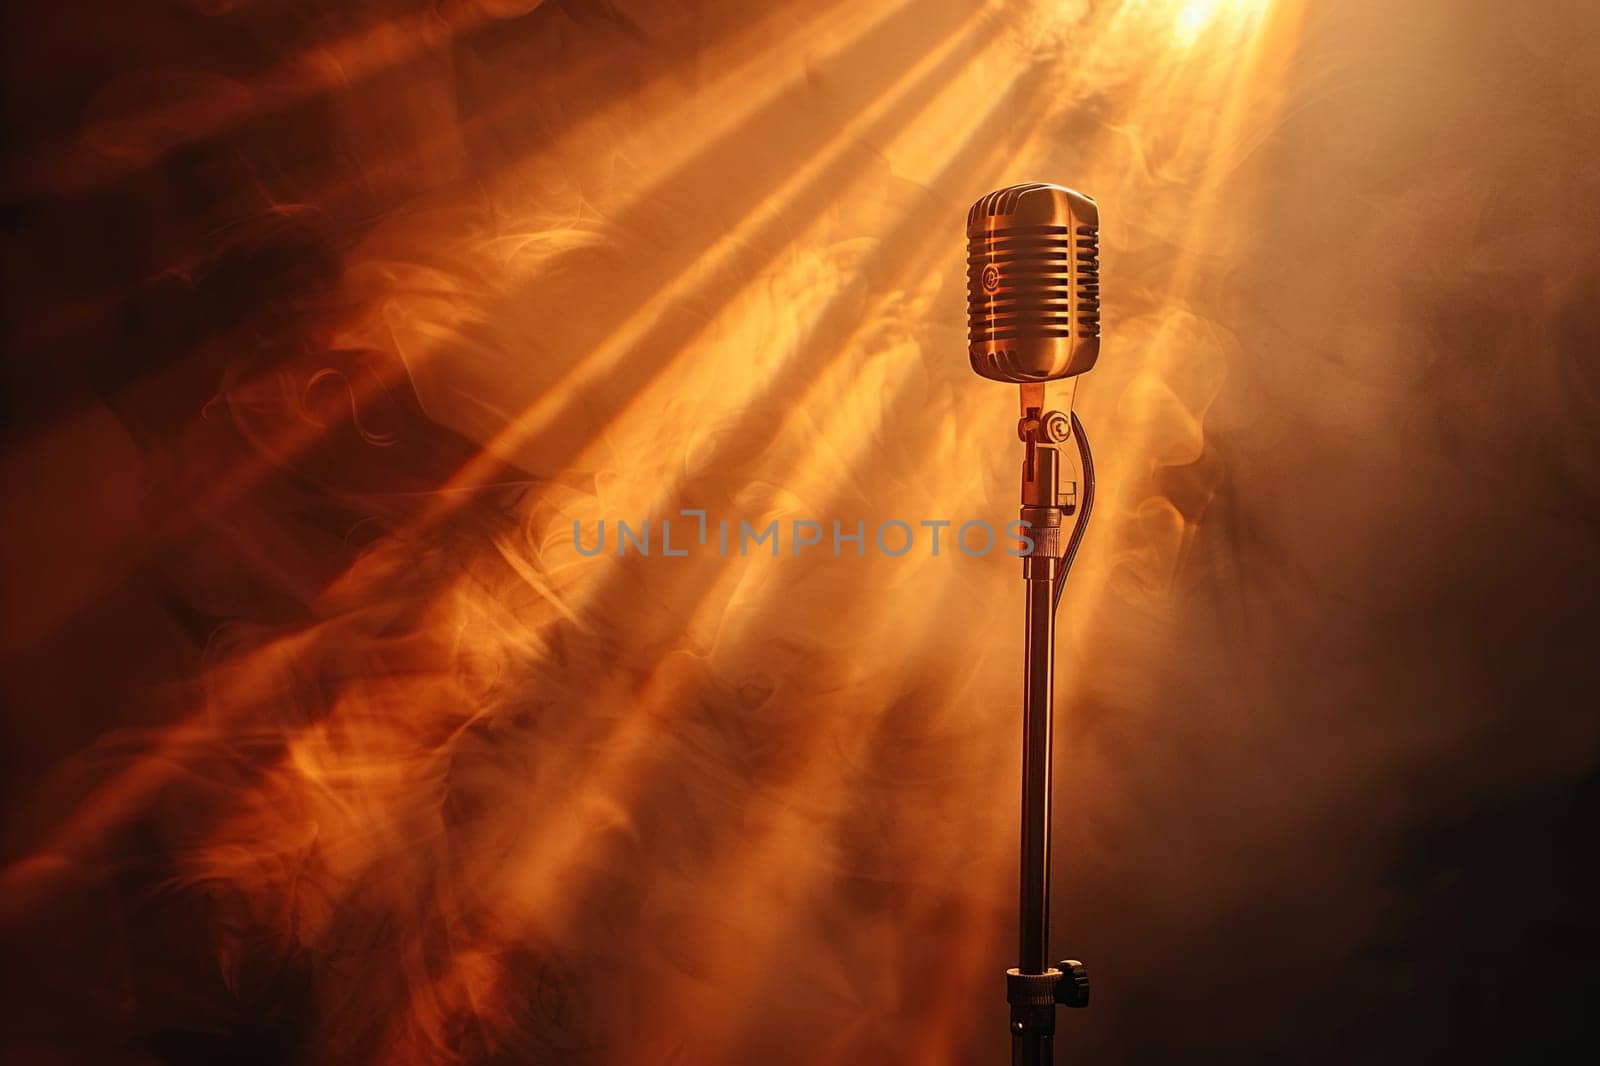 Microphone on stage in bright spotlight and smoke. Concept of performance, show, concert.